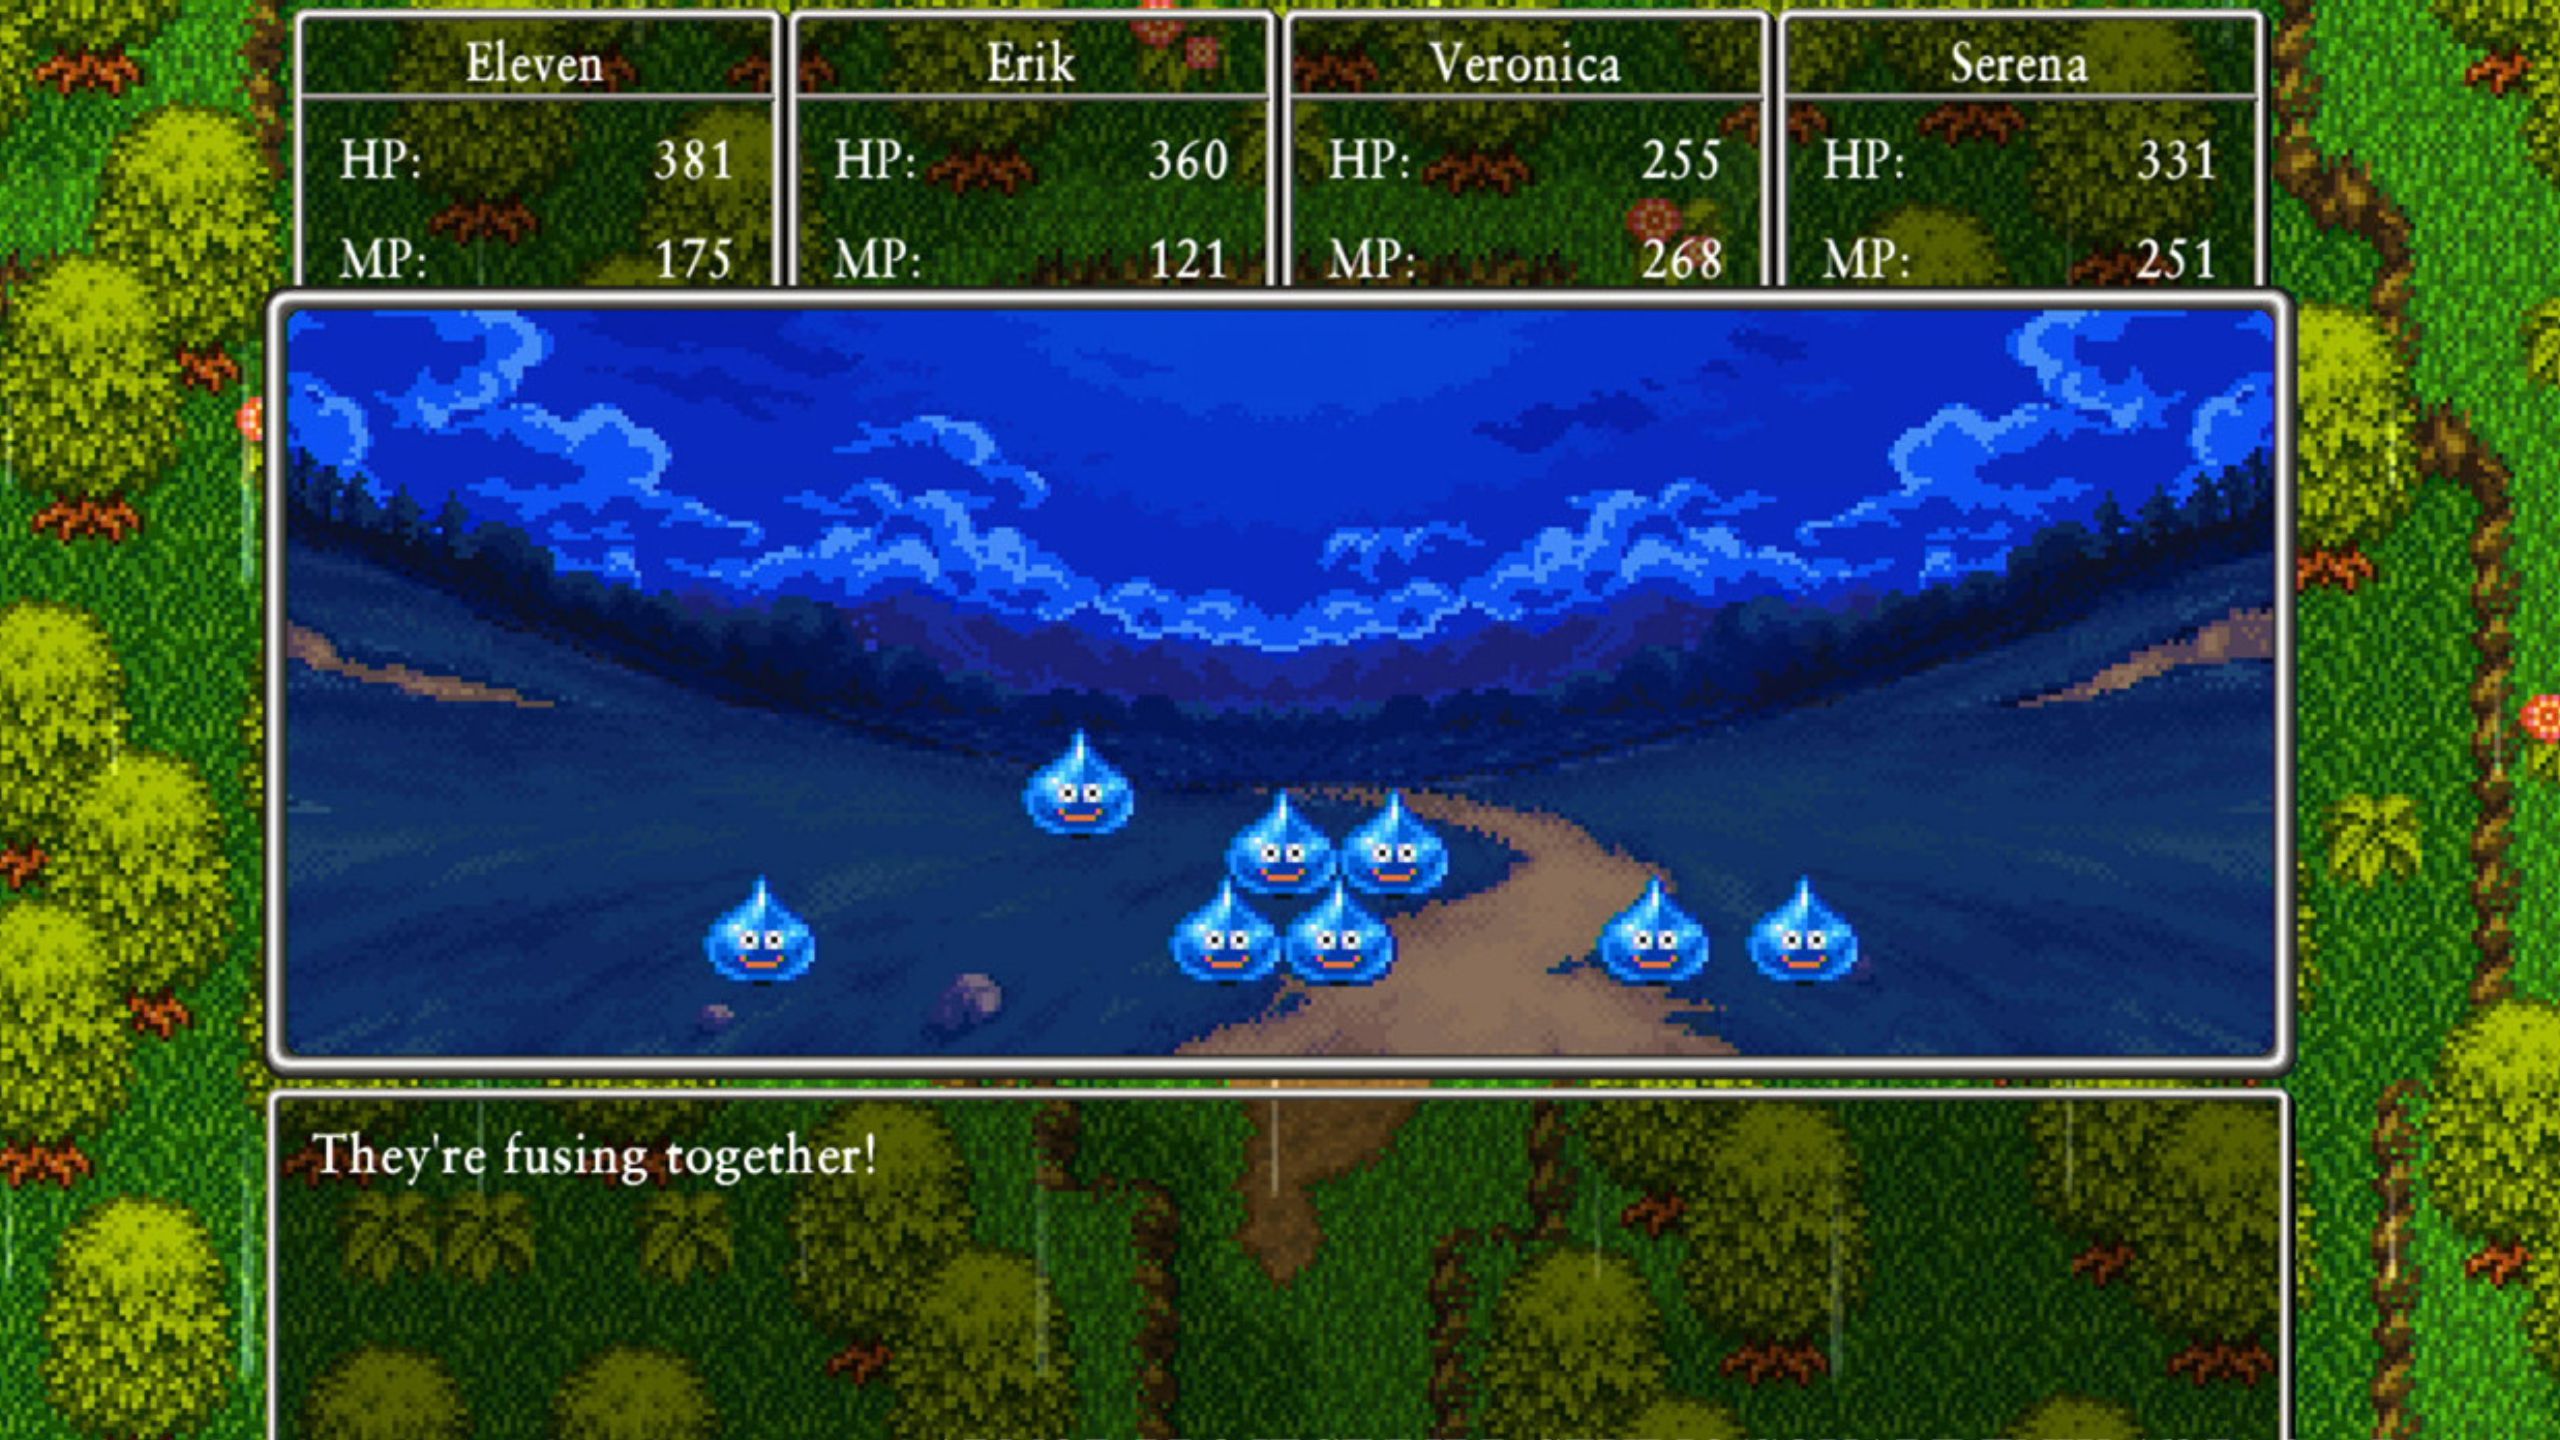 Slimes fusing together in Dragon quest.